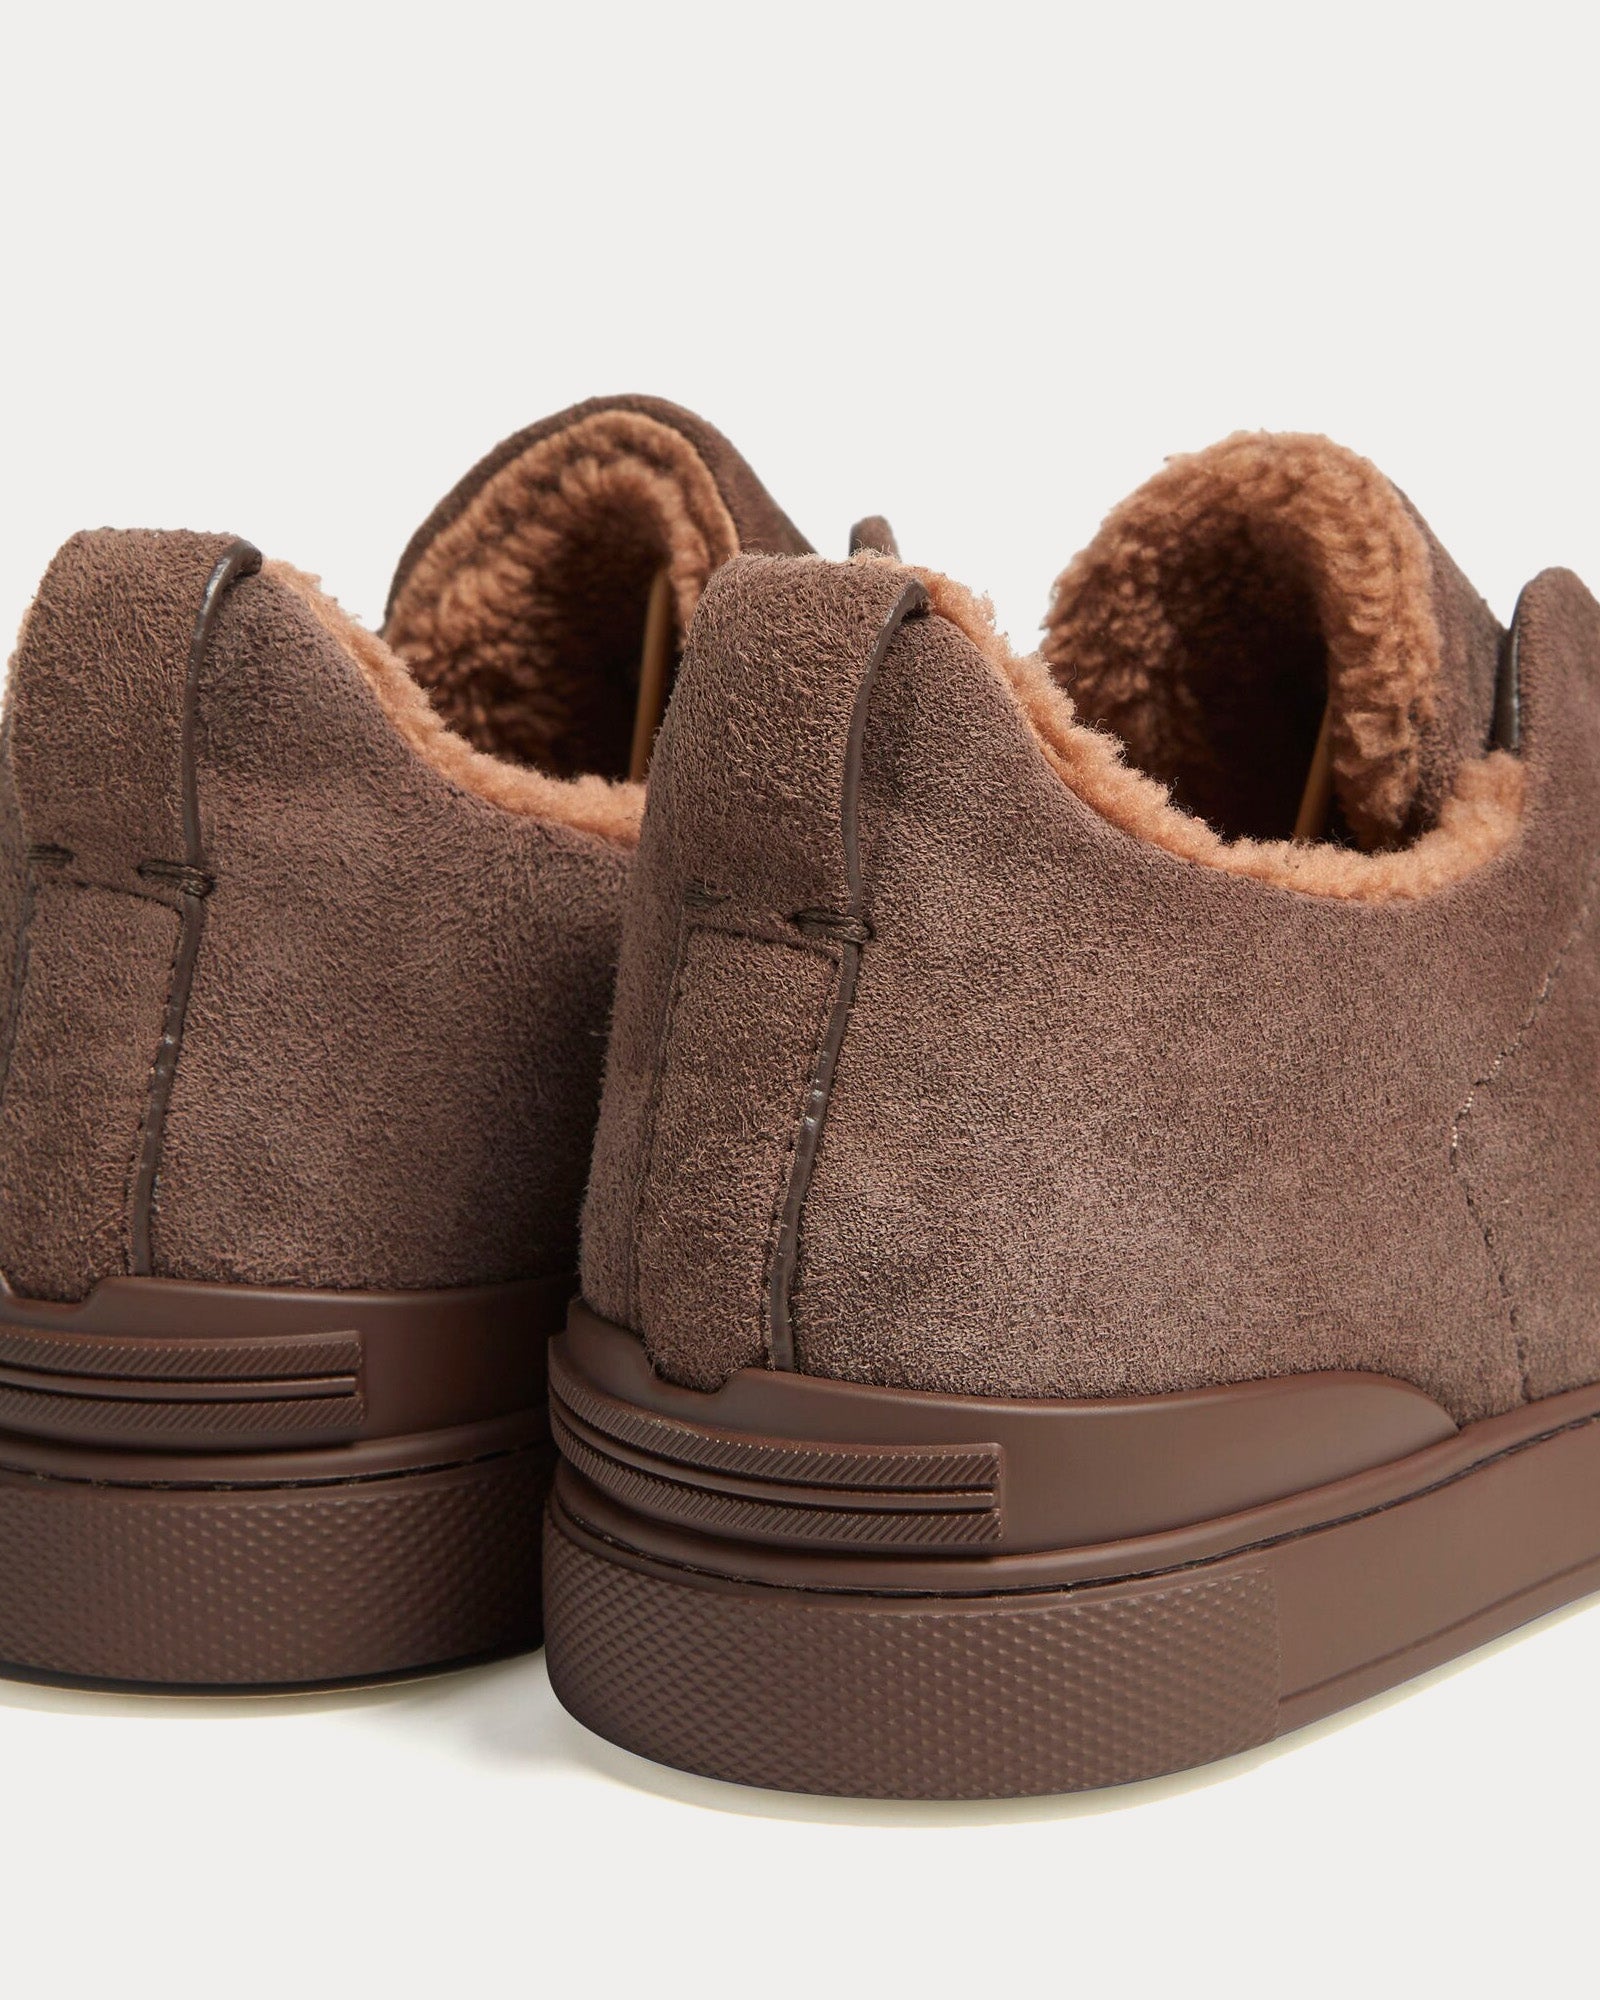 Zegna - Triple Stitch Suede & Shearling Greyish Brown Slip On Sneakers